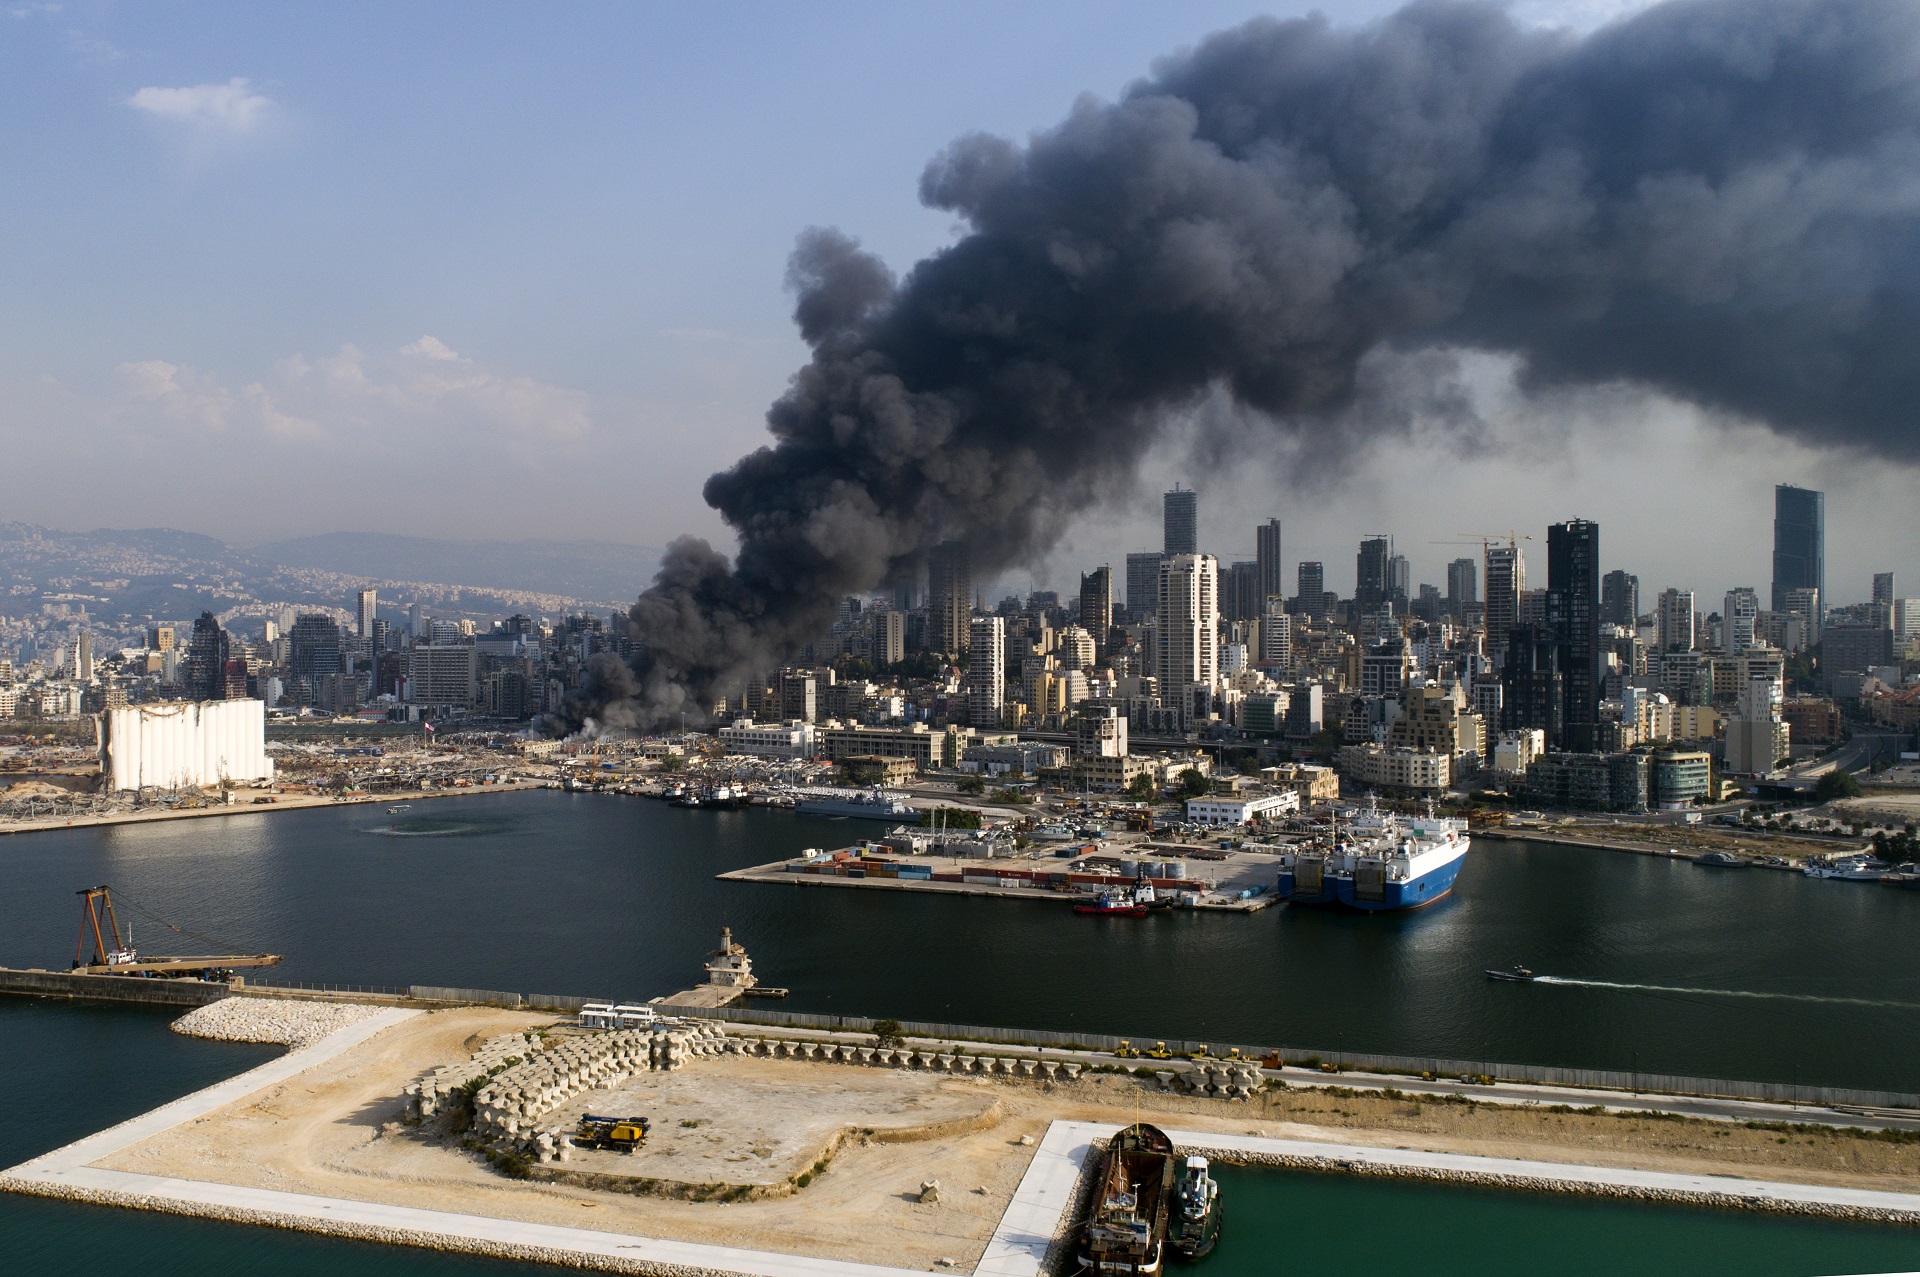 epa08659108 A picture taken with a drone shows thick smoke billows over Beirut after a fresh blaze broke out in Beirut's port in Beirut, Lebanon, 10 September 2020. A Lebanese military source said to local media that the fire broke out on 10 September in an oils and tires warehouse in the port's duty-free zone. The cause of the fire is still yet to be known.  EPA/WAEL HAMZEH